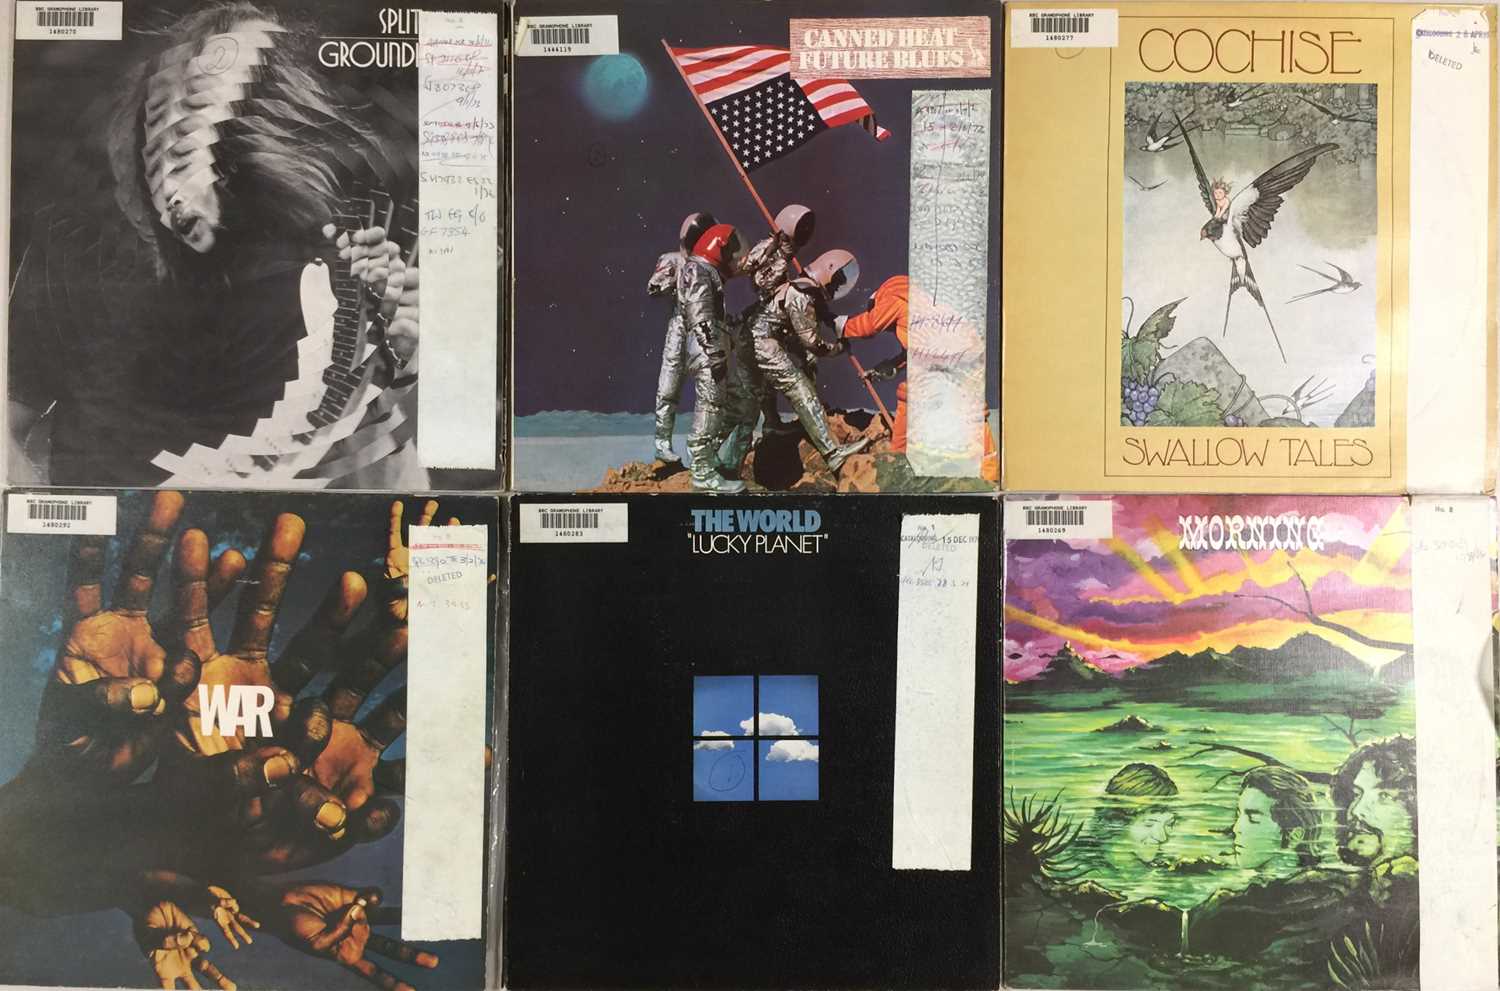 LIBERTY RECORDS - LP COLLECTION